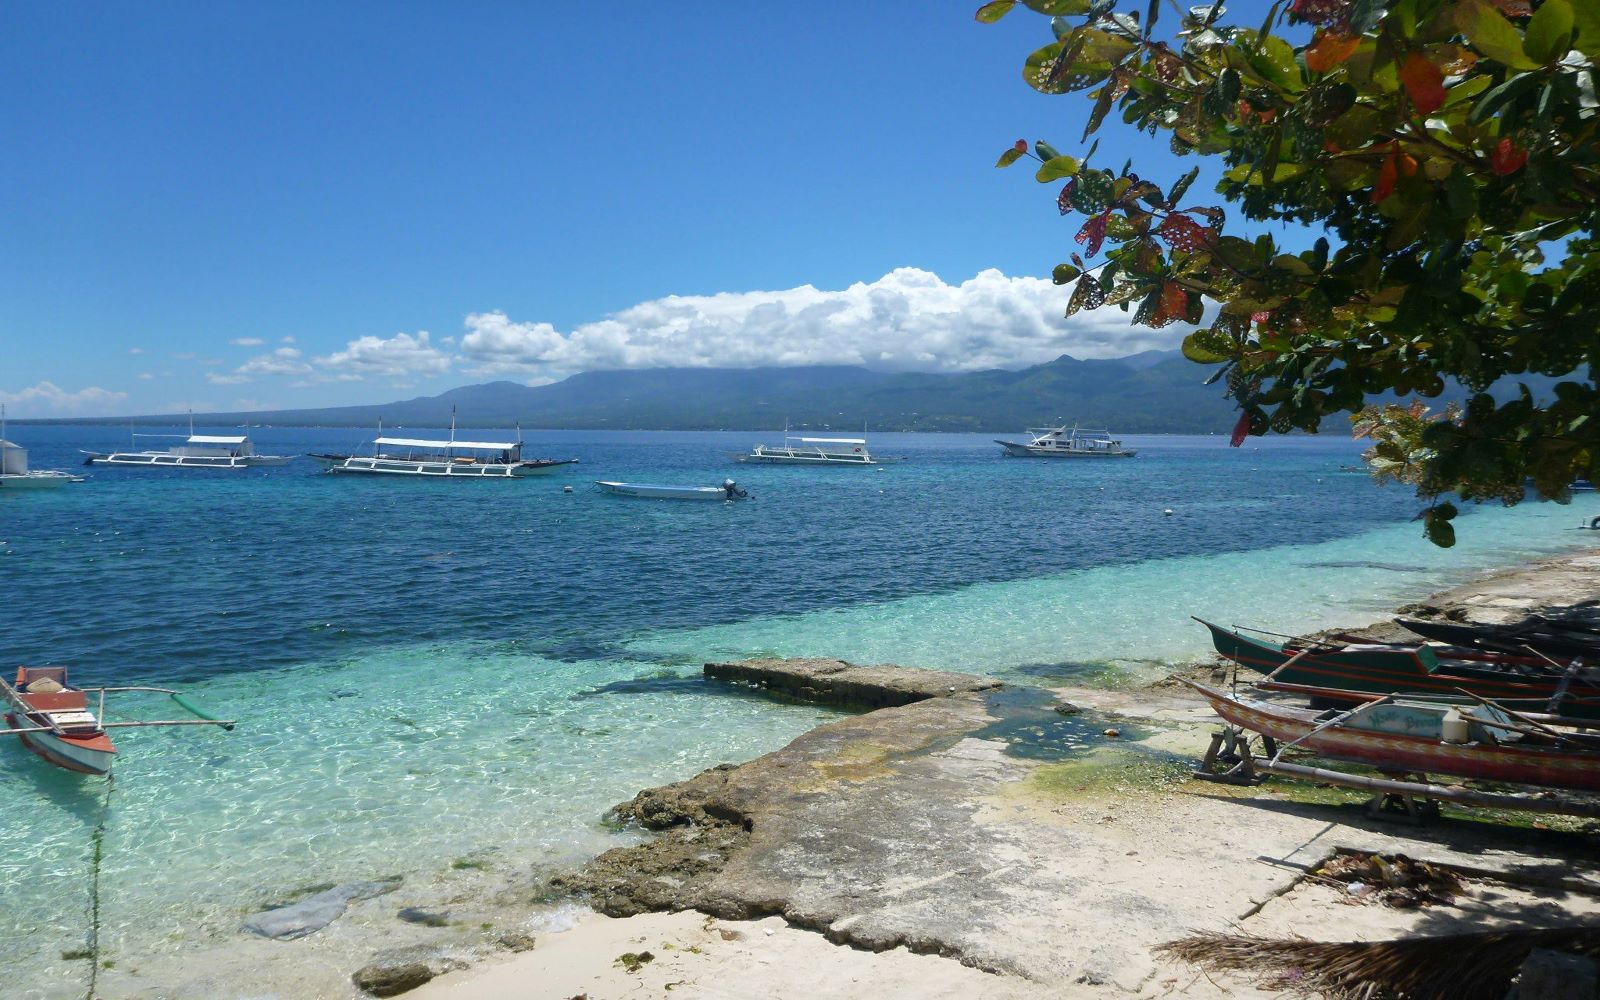 A coral reef in blue water with boats on it